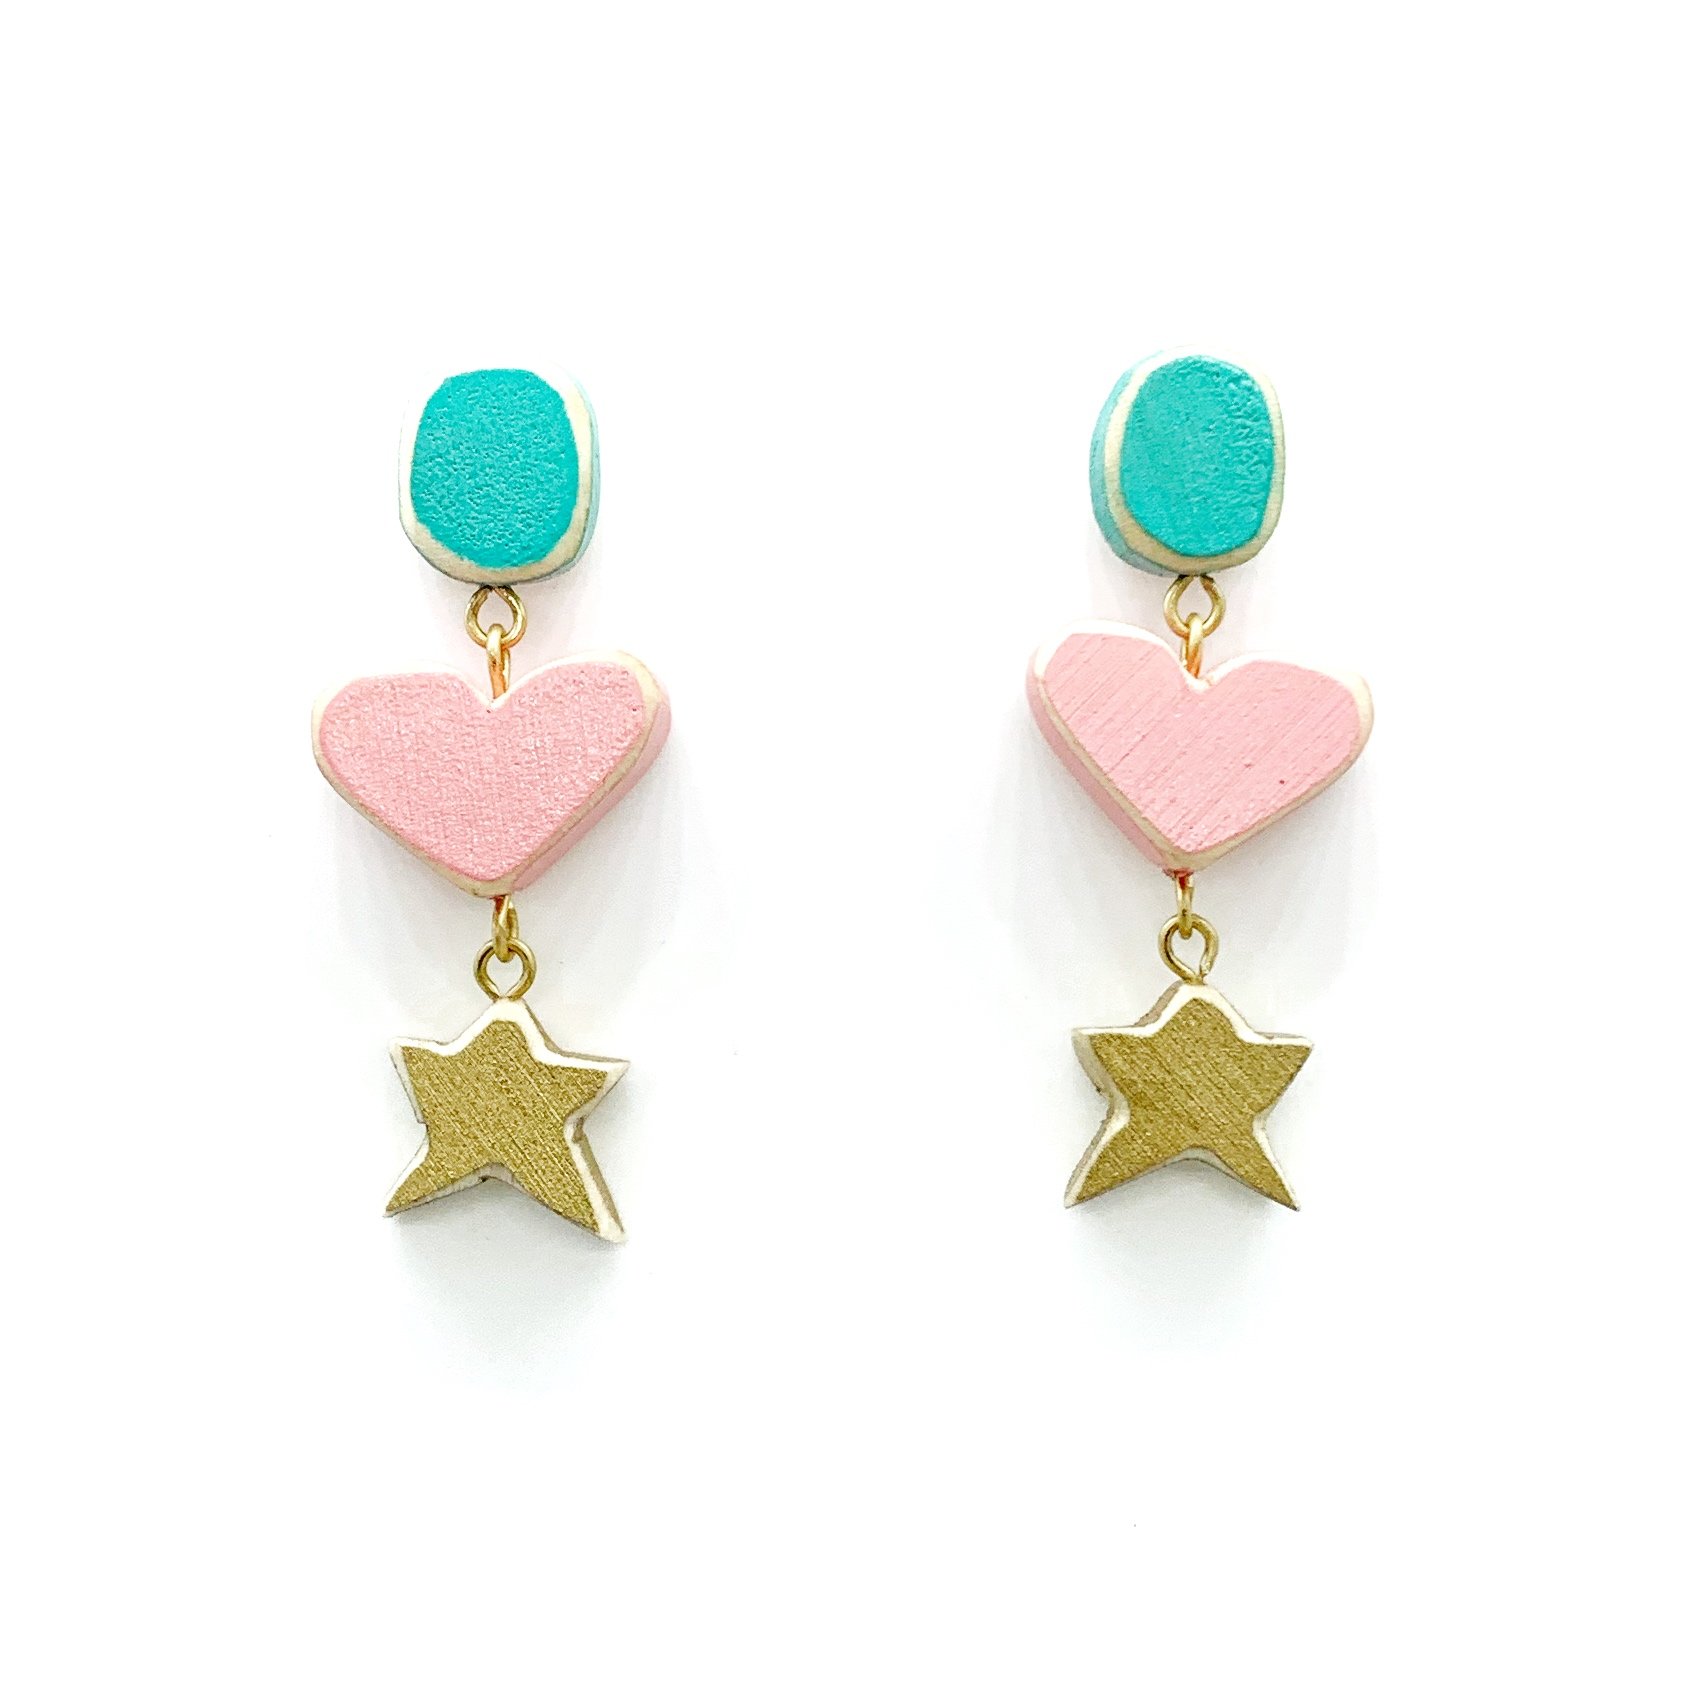 Barbie The Movie Bling Heart Earrings NWT Pink Blonde FAST SHIPPING - $15  New With Tags - From Julia